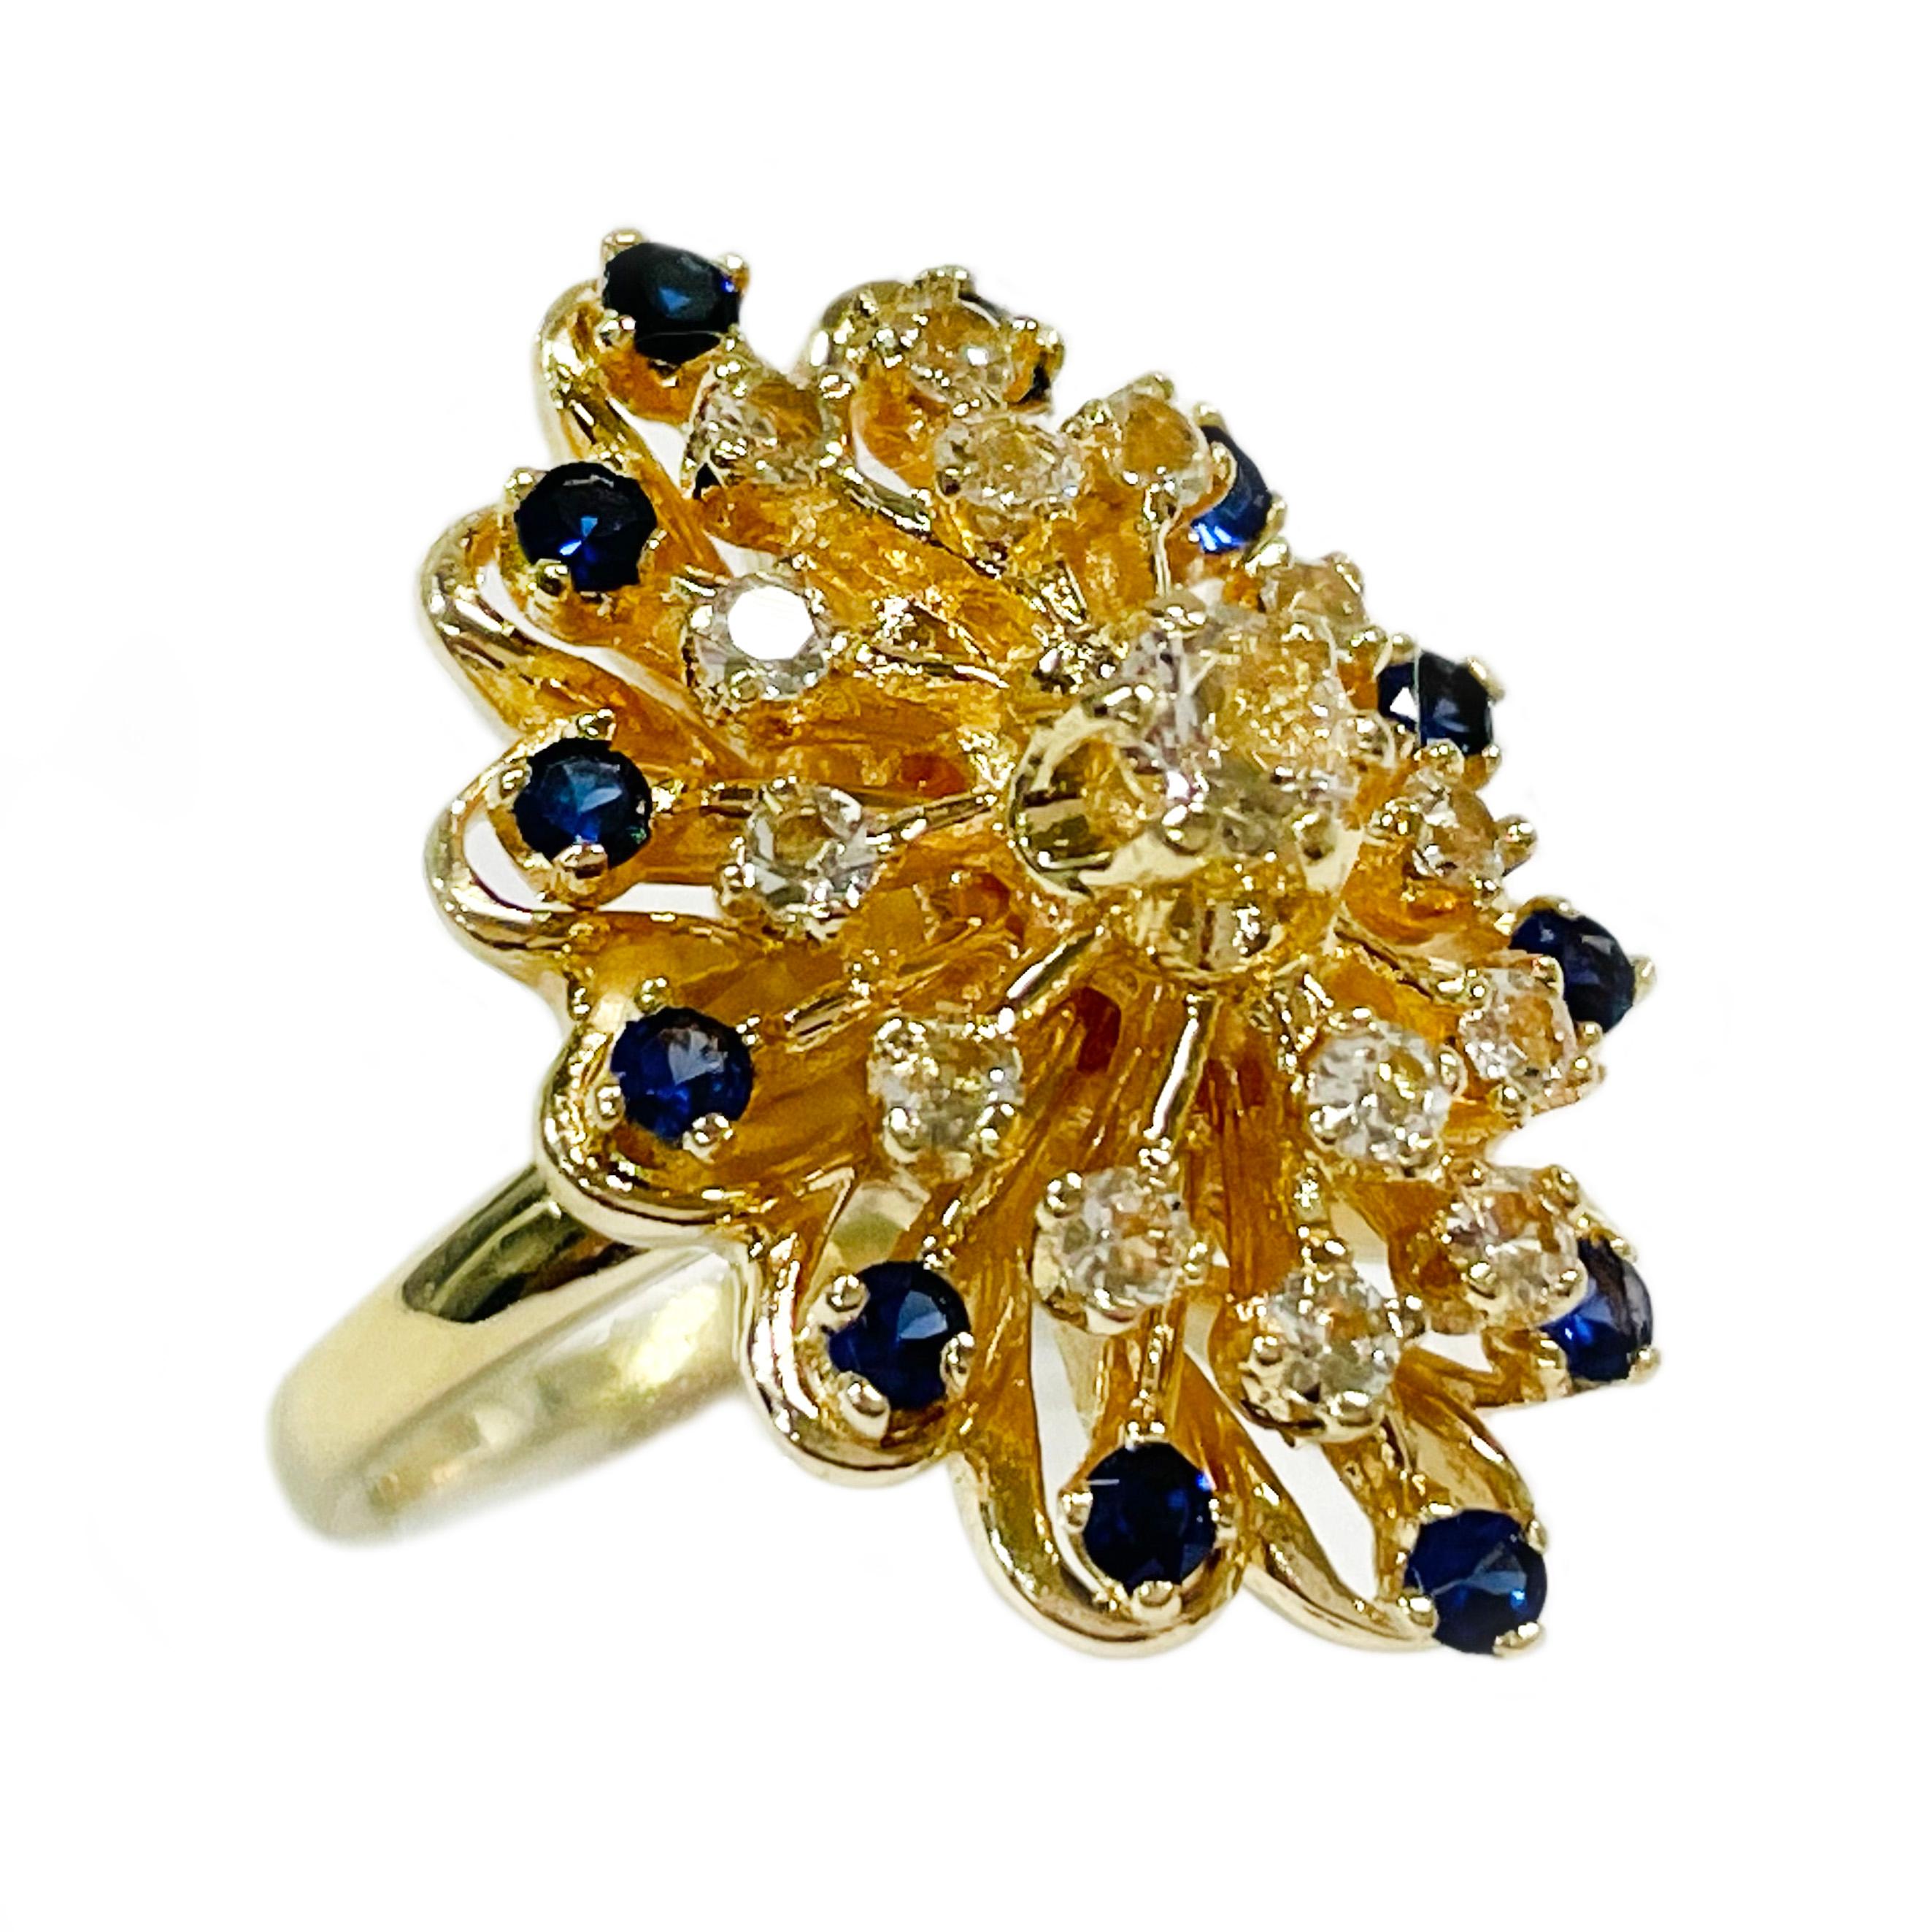 14 Karat Yellow Gold Blue & White Cluster Ring. This stunning and super shiny ring features fifteen round white sapphires and twelve round medium blue sapphires, all prong-set in multi-tiered branch-like arms that stem from a flower-shaped base